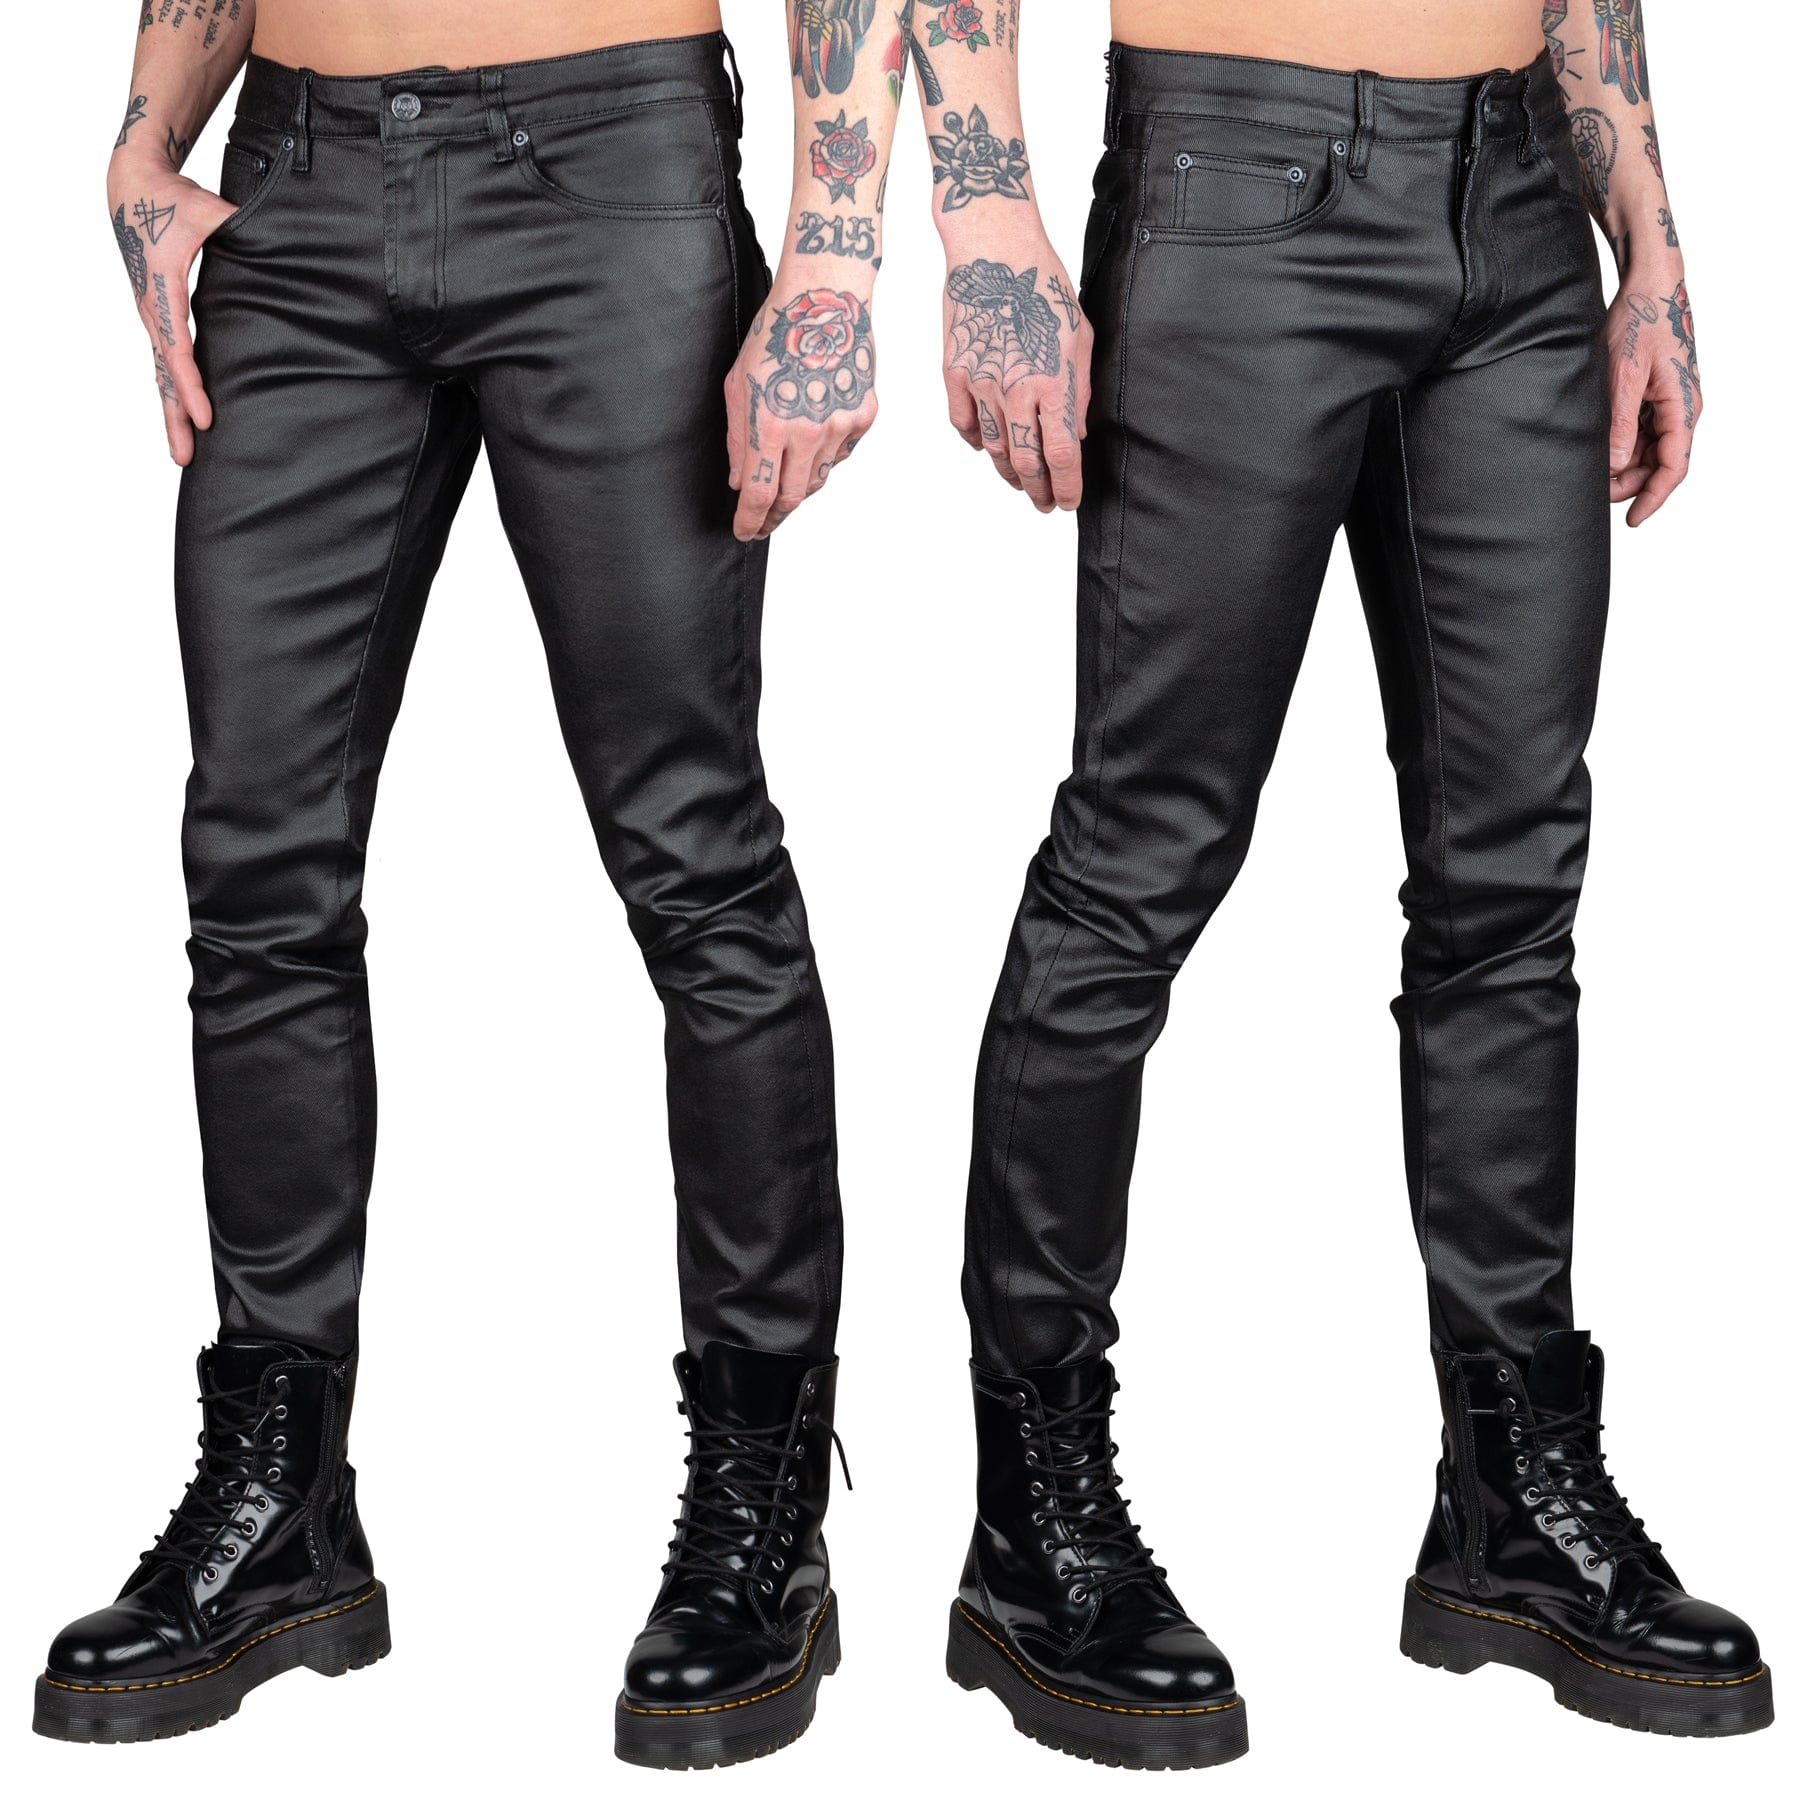 Wornstar Clothing Rampager Waxed Denim Stage Jeans